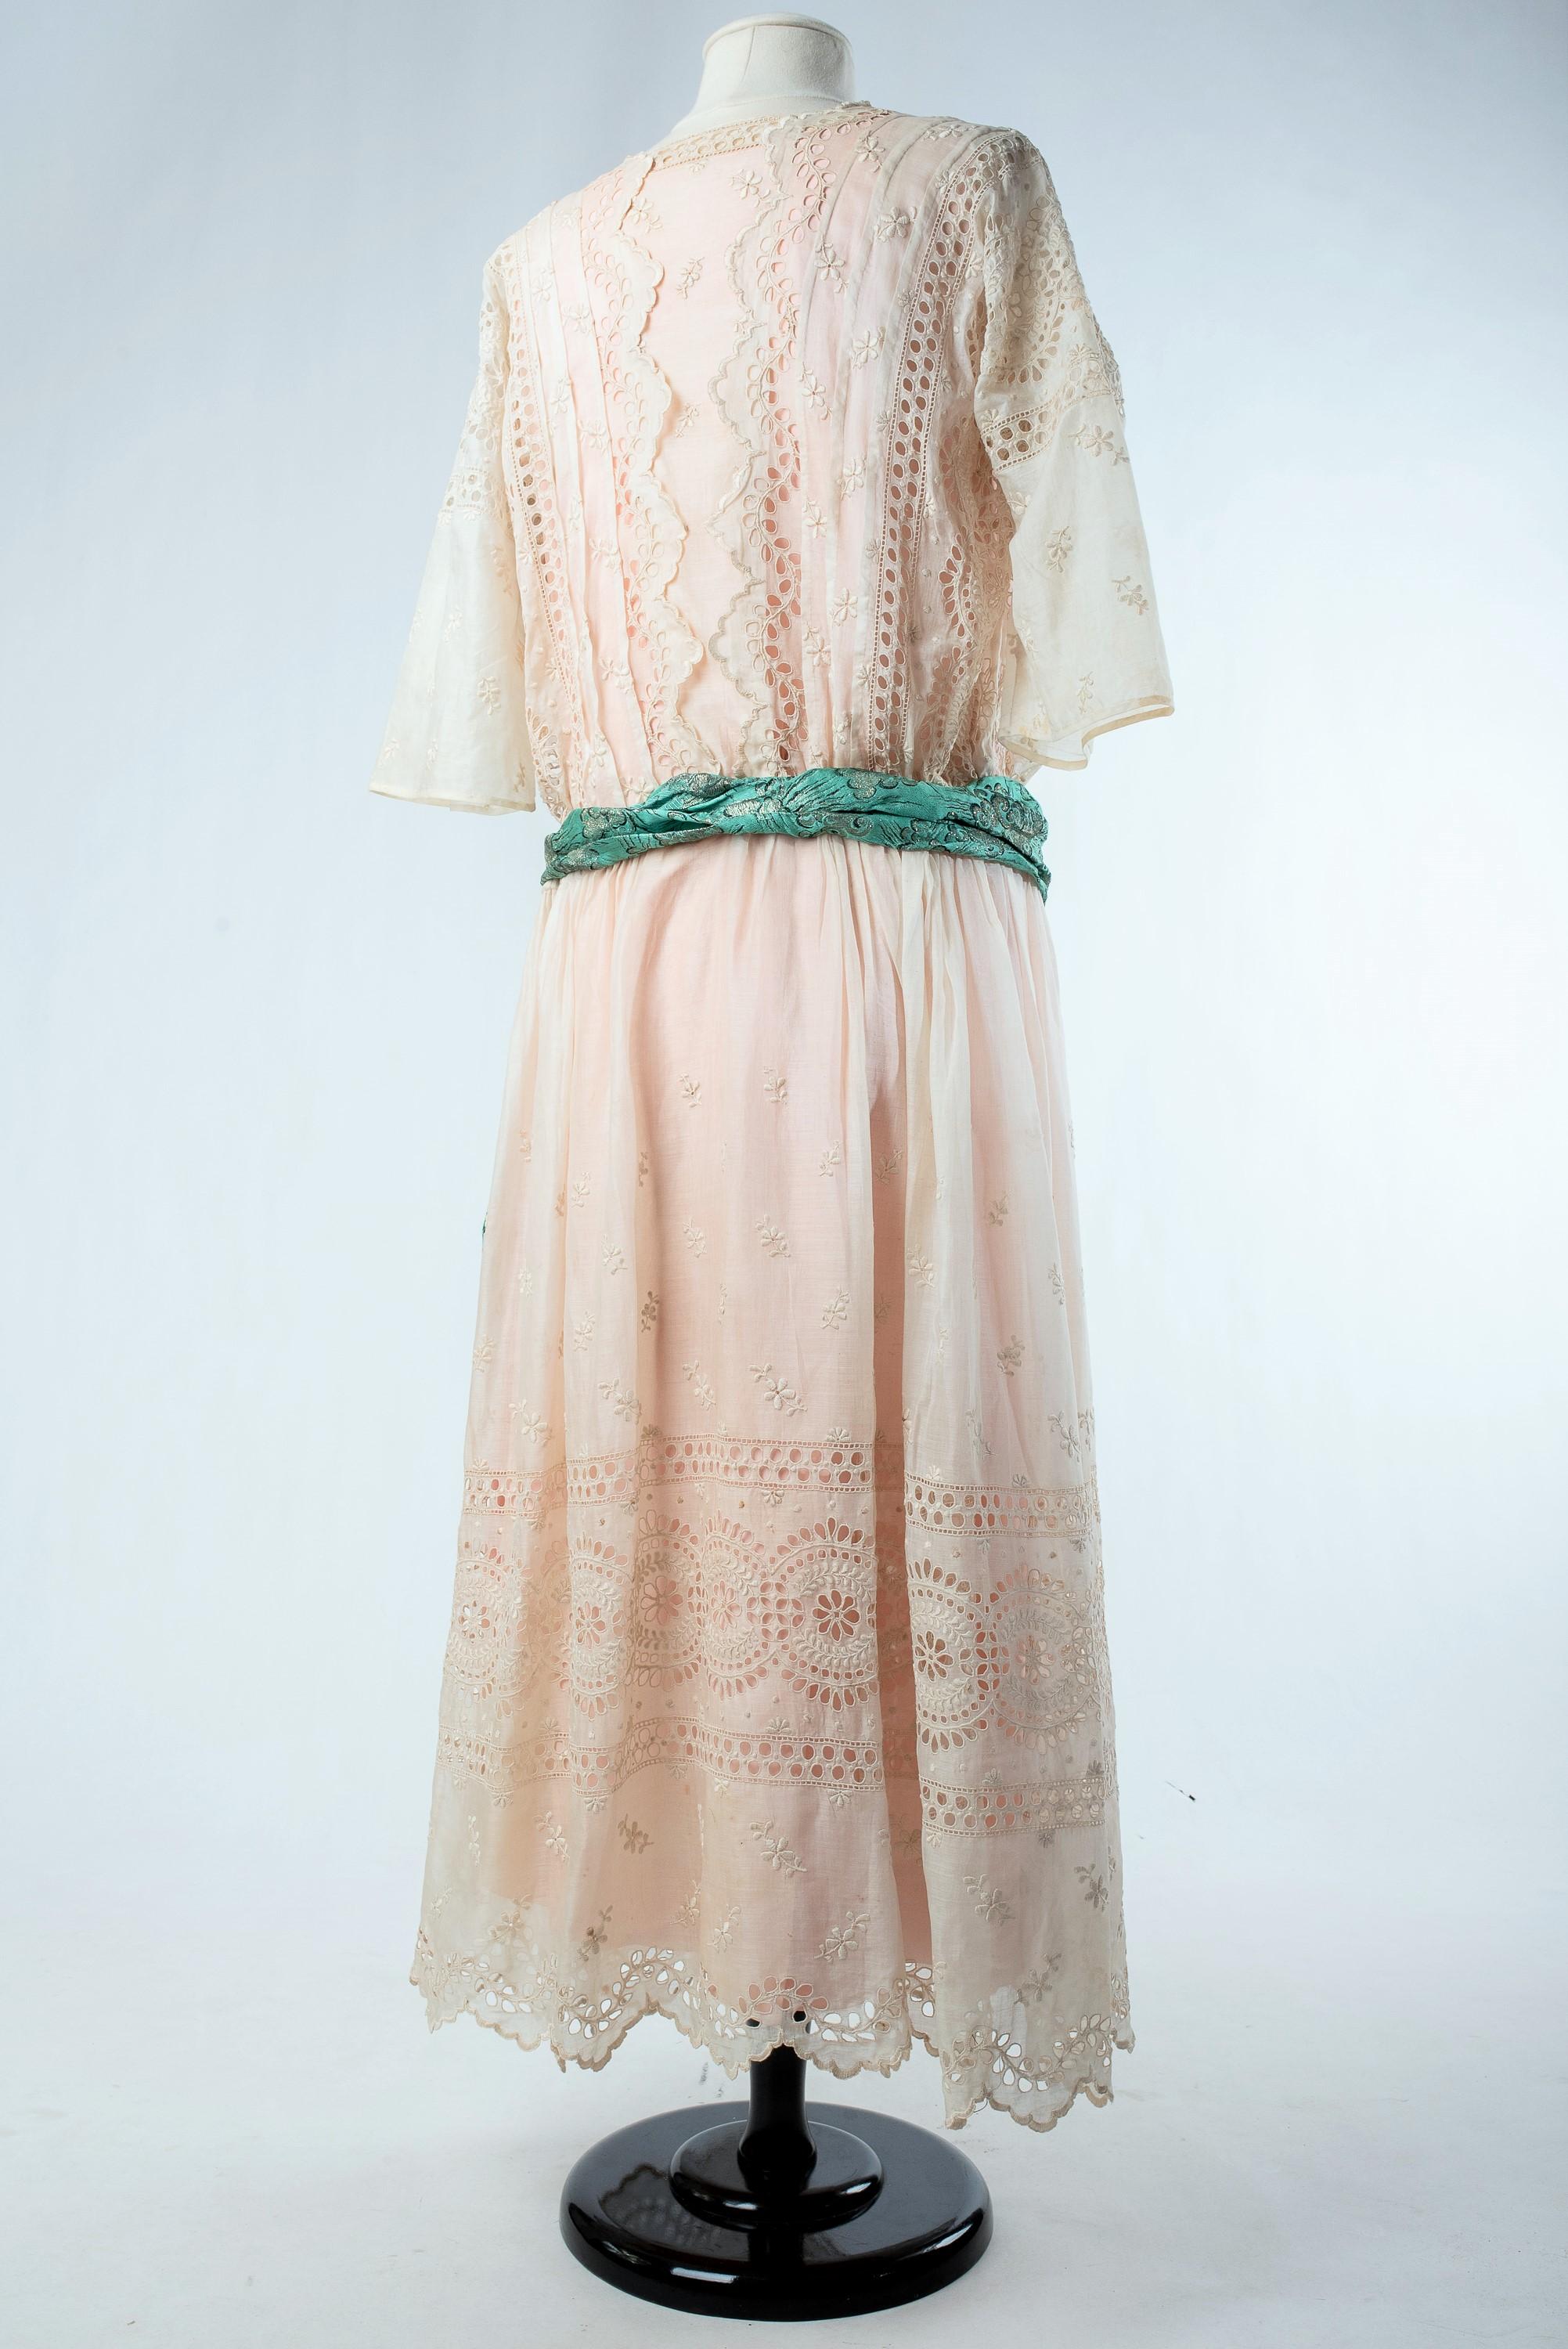 Women's A silk pongee & White Embroidery Chiffon Summer Dress - France Circa 1920 For Sale